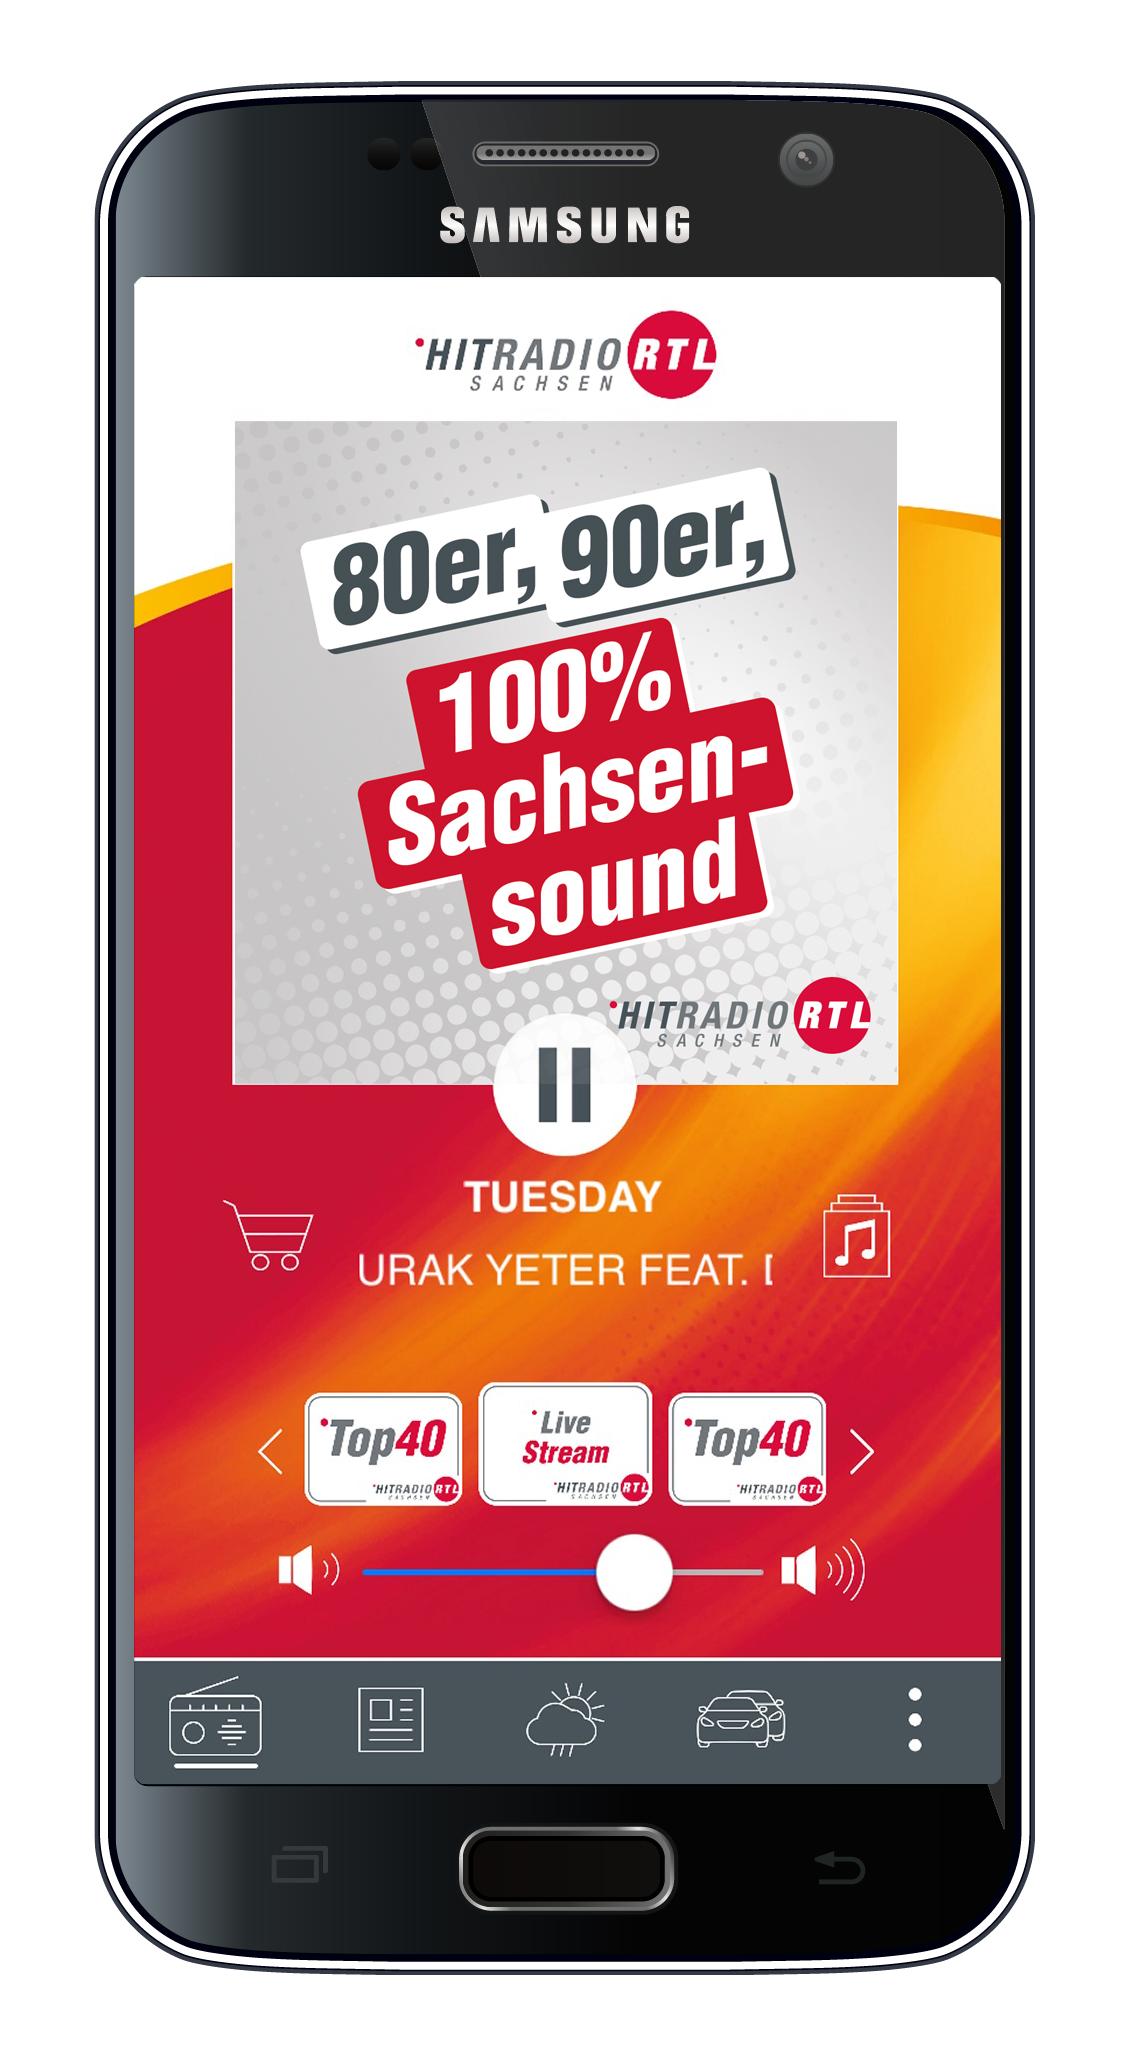 HITRADIO RTL for Android - APK Download